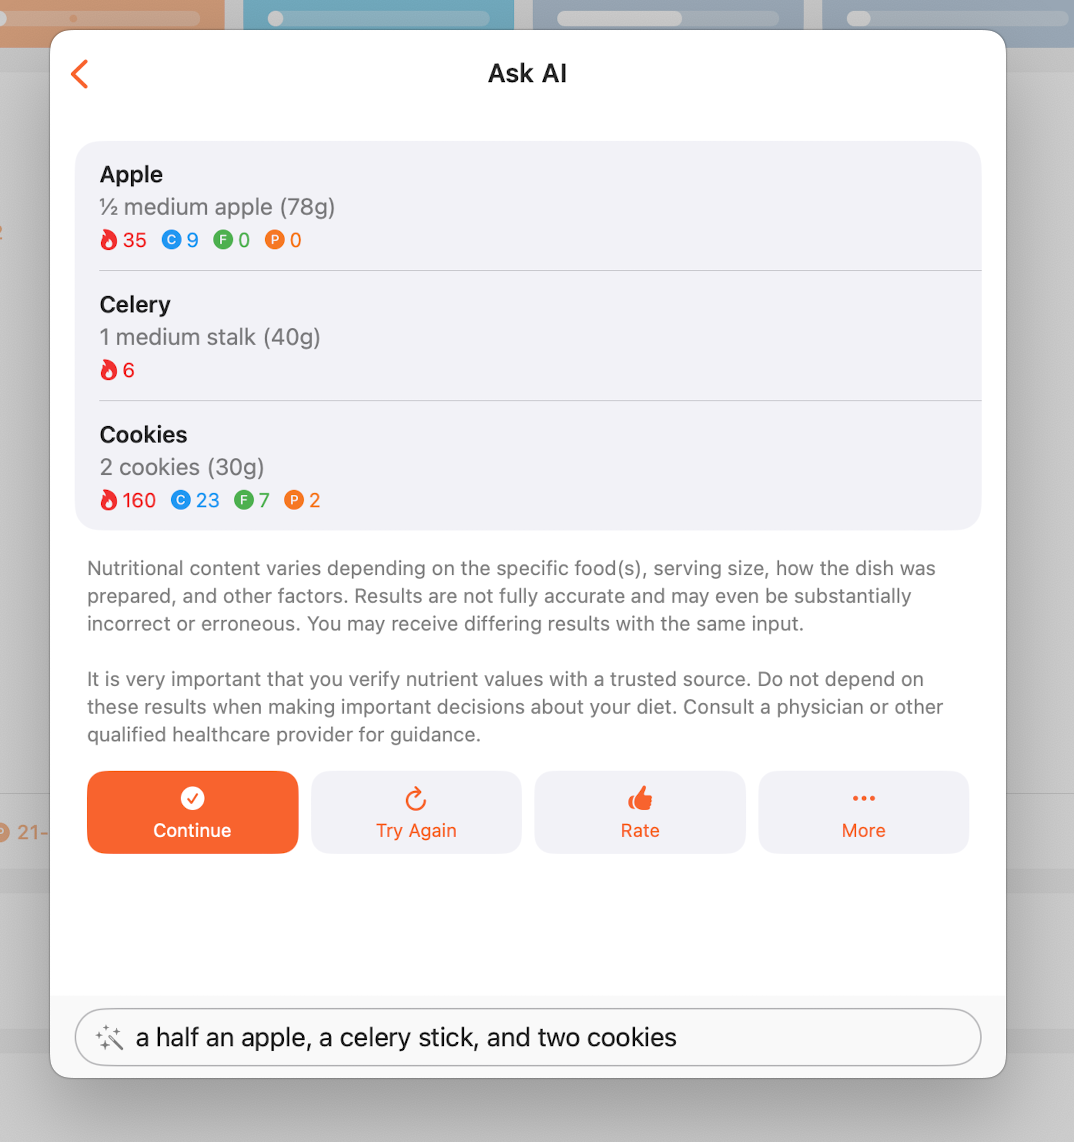 Screenshot of the Ask AI screen with query for a half an apple, stick of celery, and two cookies